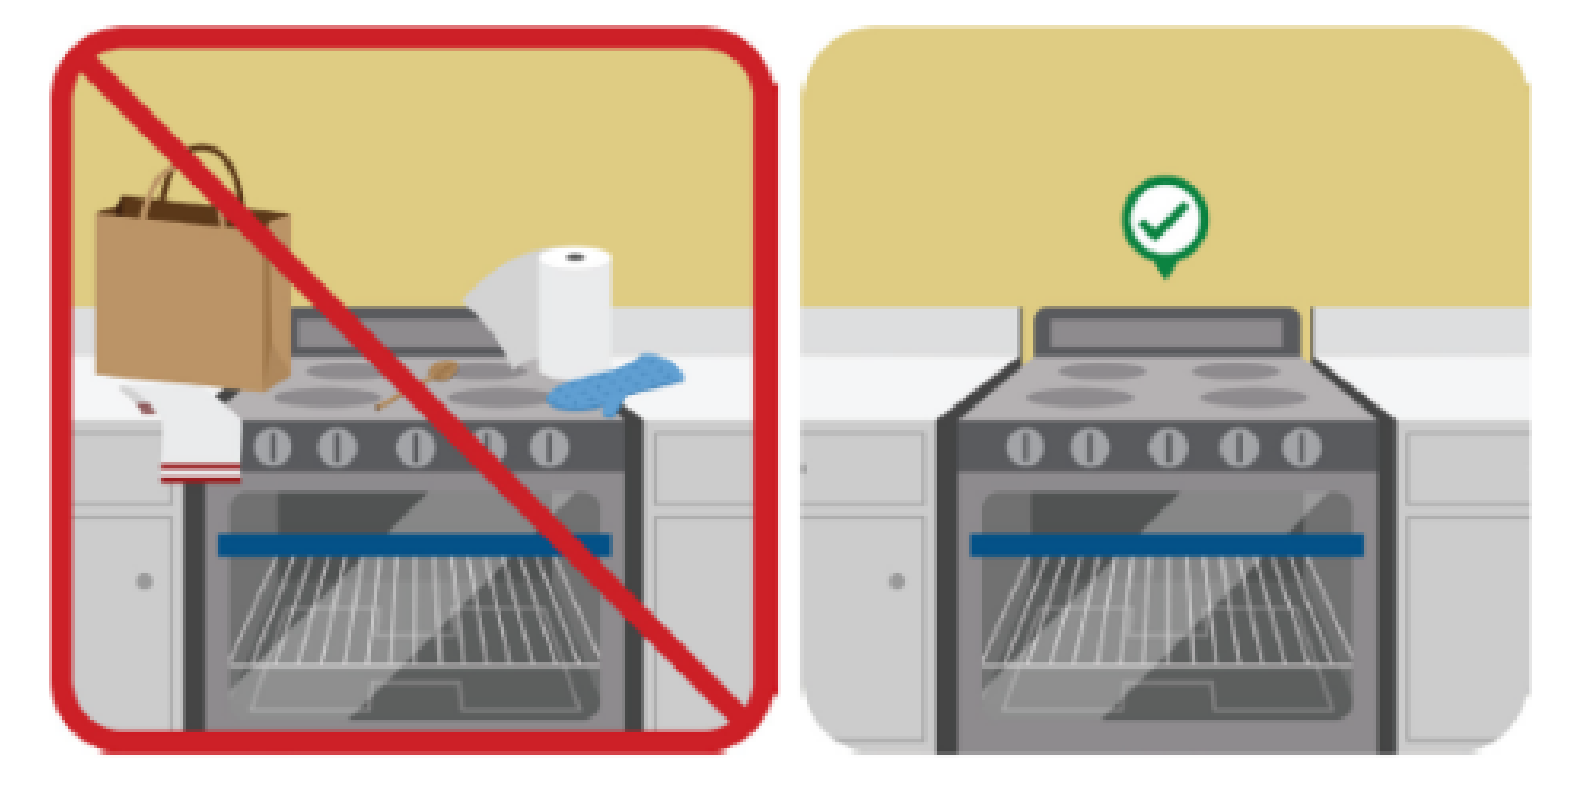 A cancel sign over a stovetop oven covered with a shopping bag, a cloth, a wooden spoon, an oven mit and a roll of paper towel. A check mark above the cleared stovetop oven.